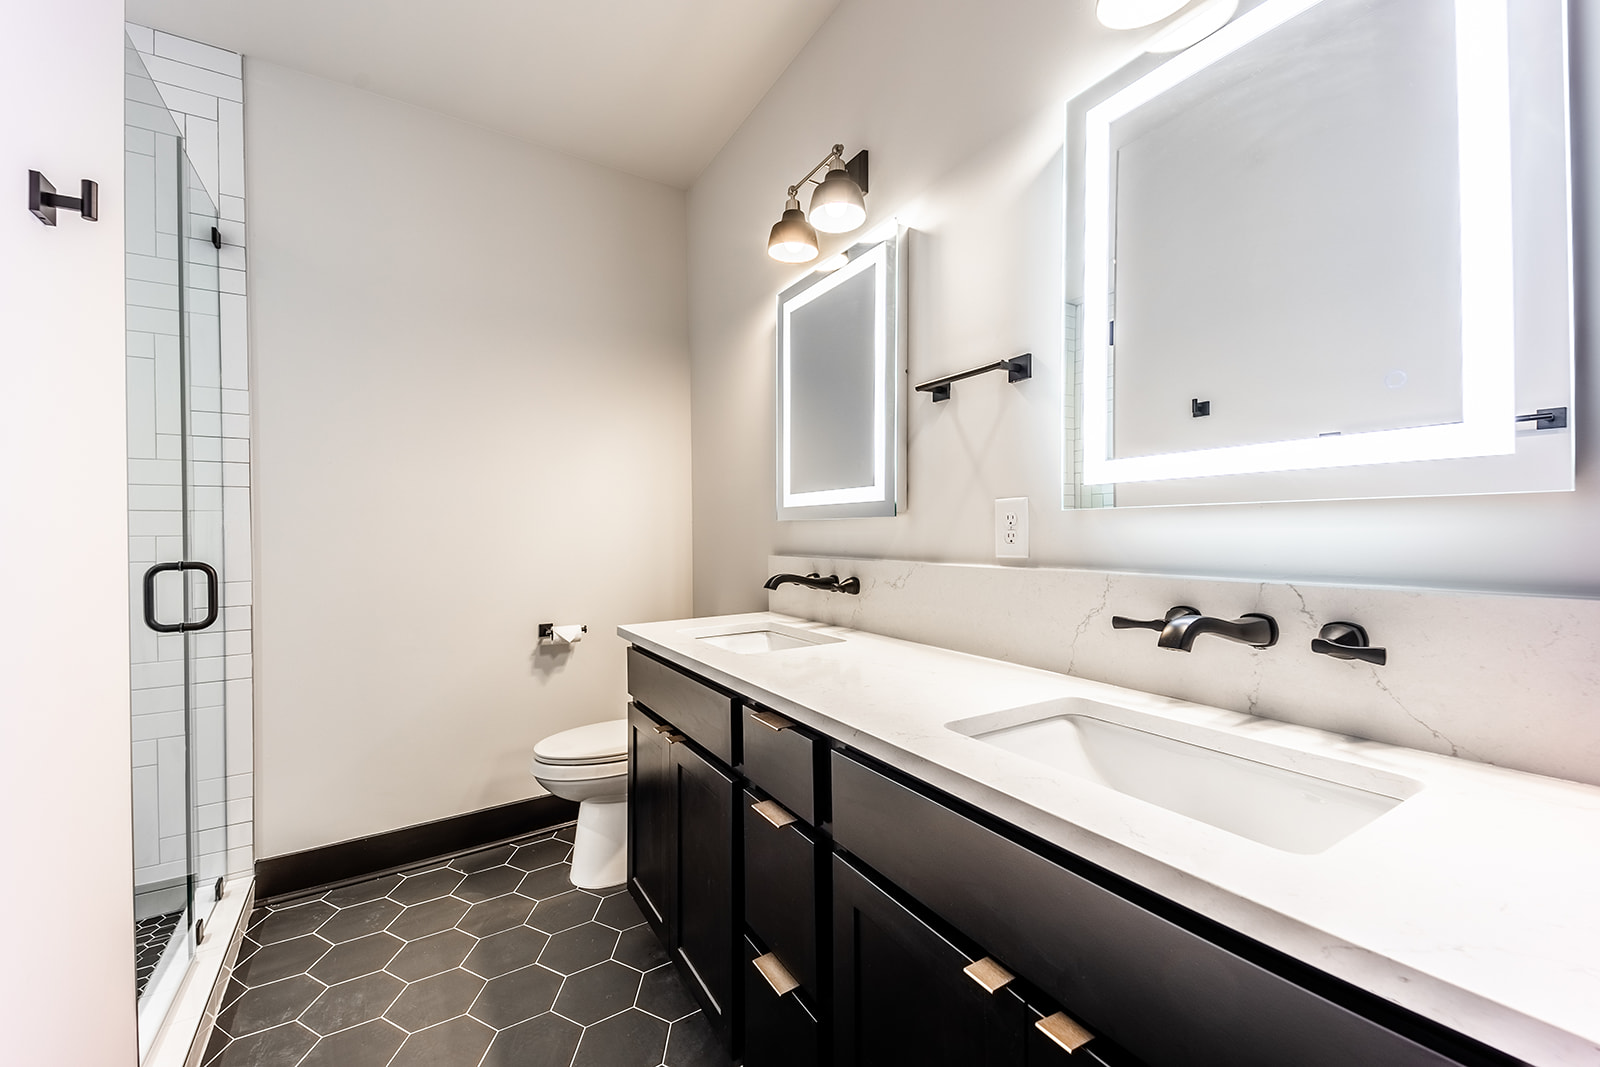 1st unit: 2nd bathroom (3rd floor) with dual vanity, LED mirrors, and stand in shower.